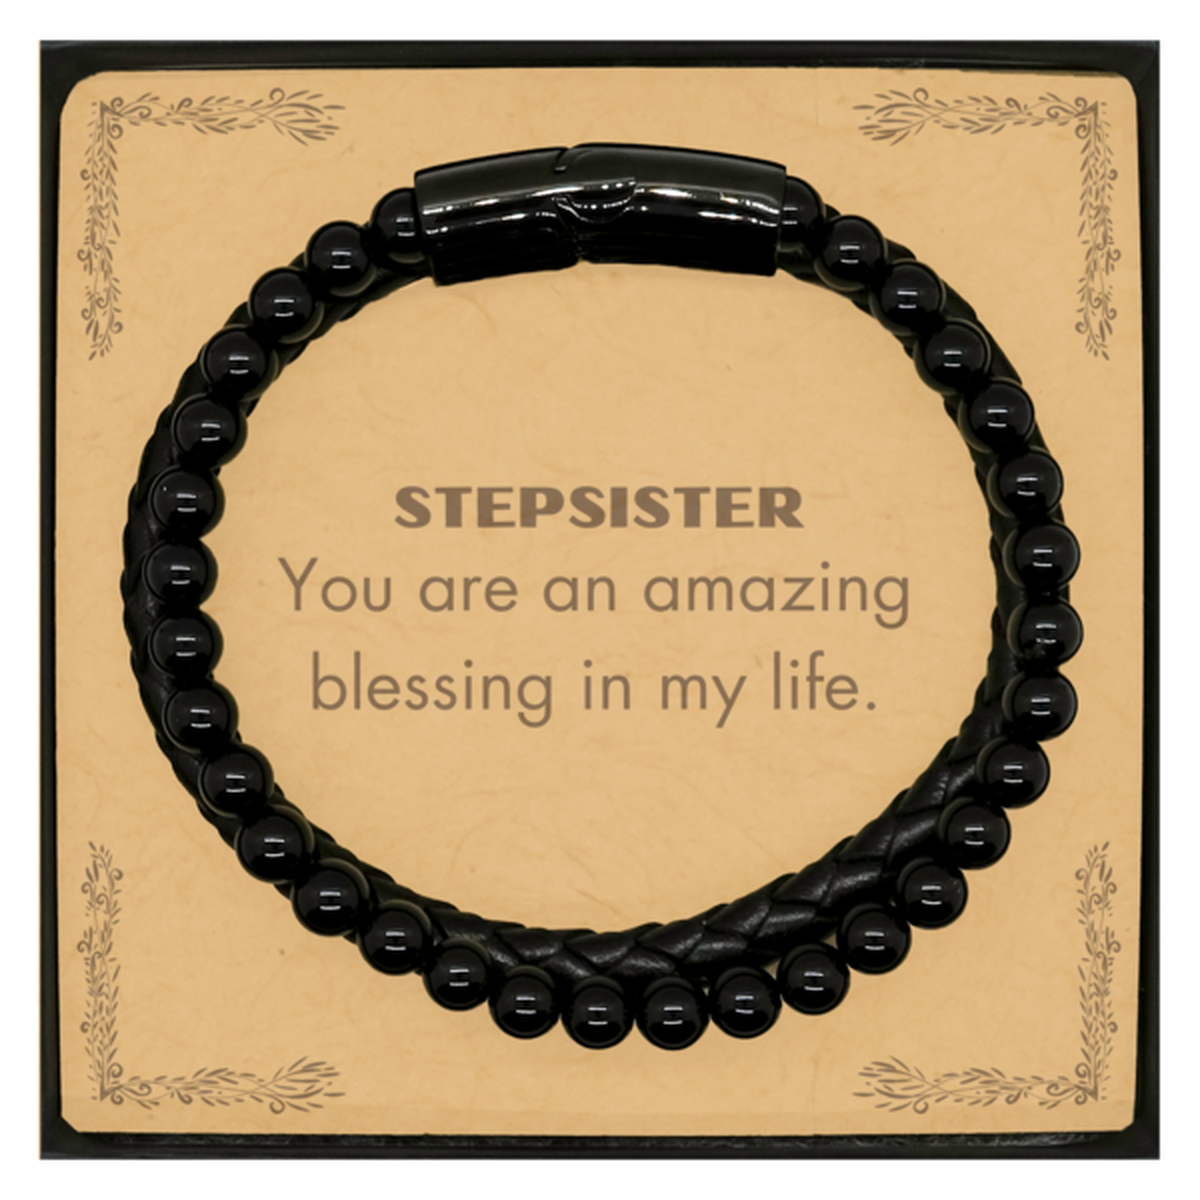 Stepsister Stone Leather Bracelets, You are an amazing blessing in my life, Thank You Gifts For Stepsister, Inspirational Birthday Christmas Unique Gifts For Stepsister